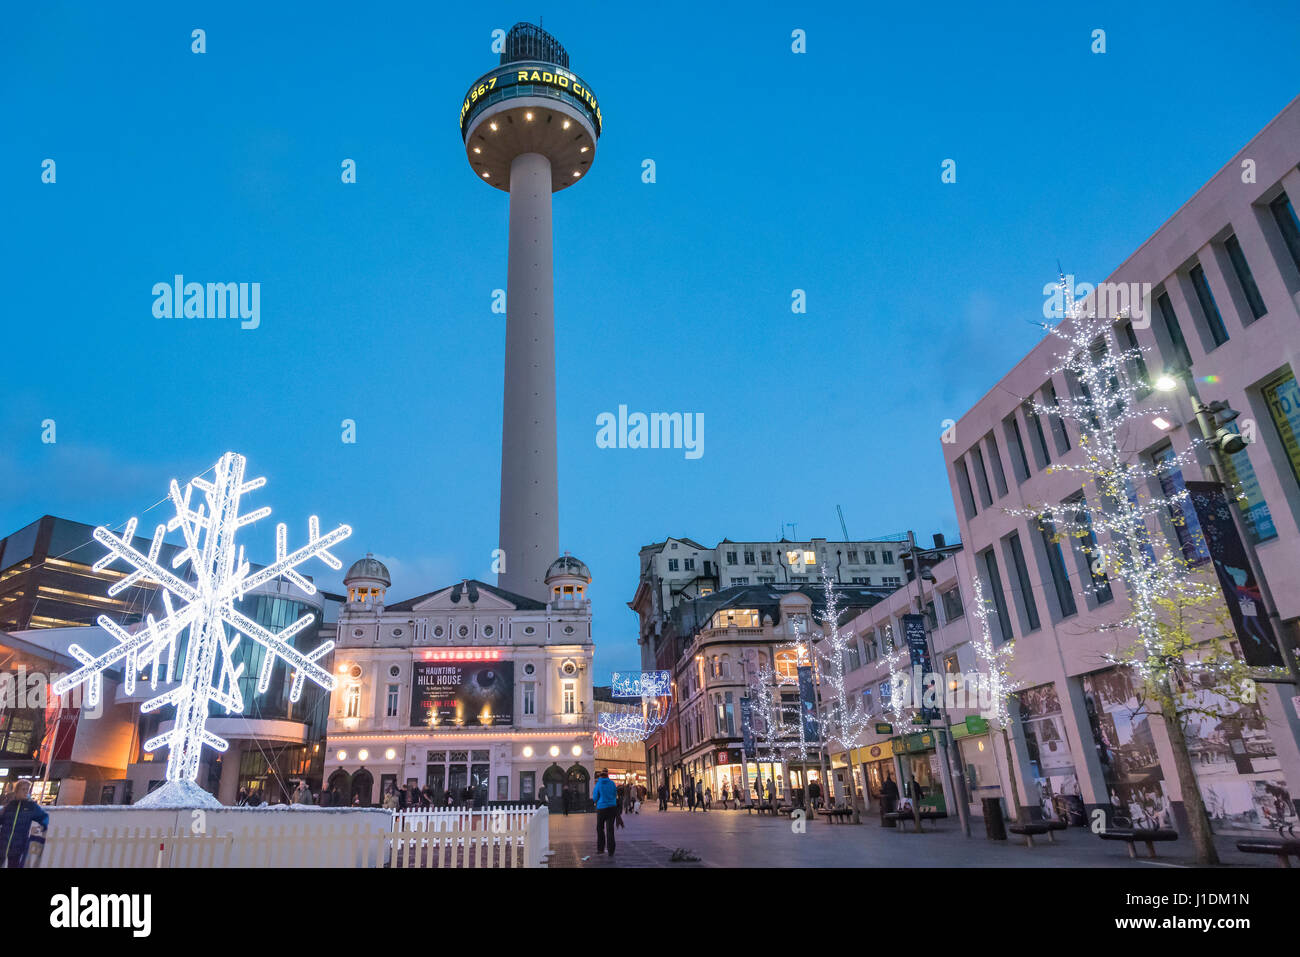 The St, John's beacon twoer in Williamson Square Liverpool floodlit at night. Christam decorations Stock Photo